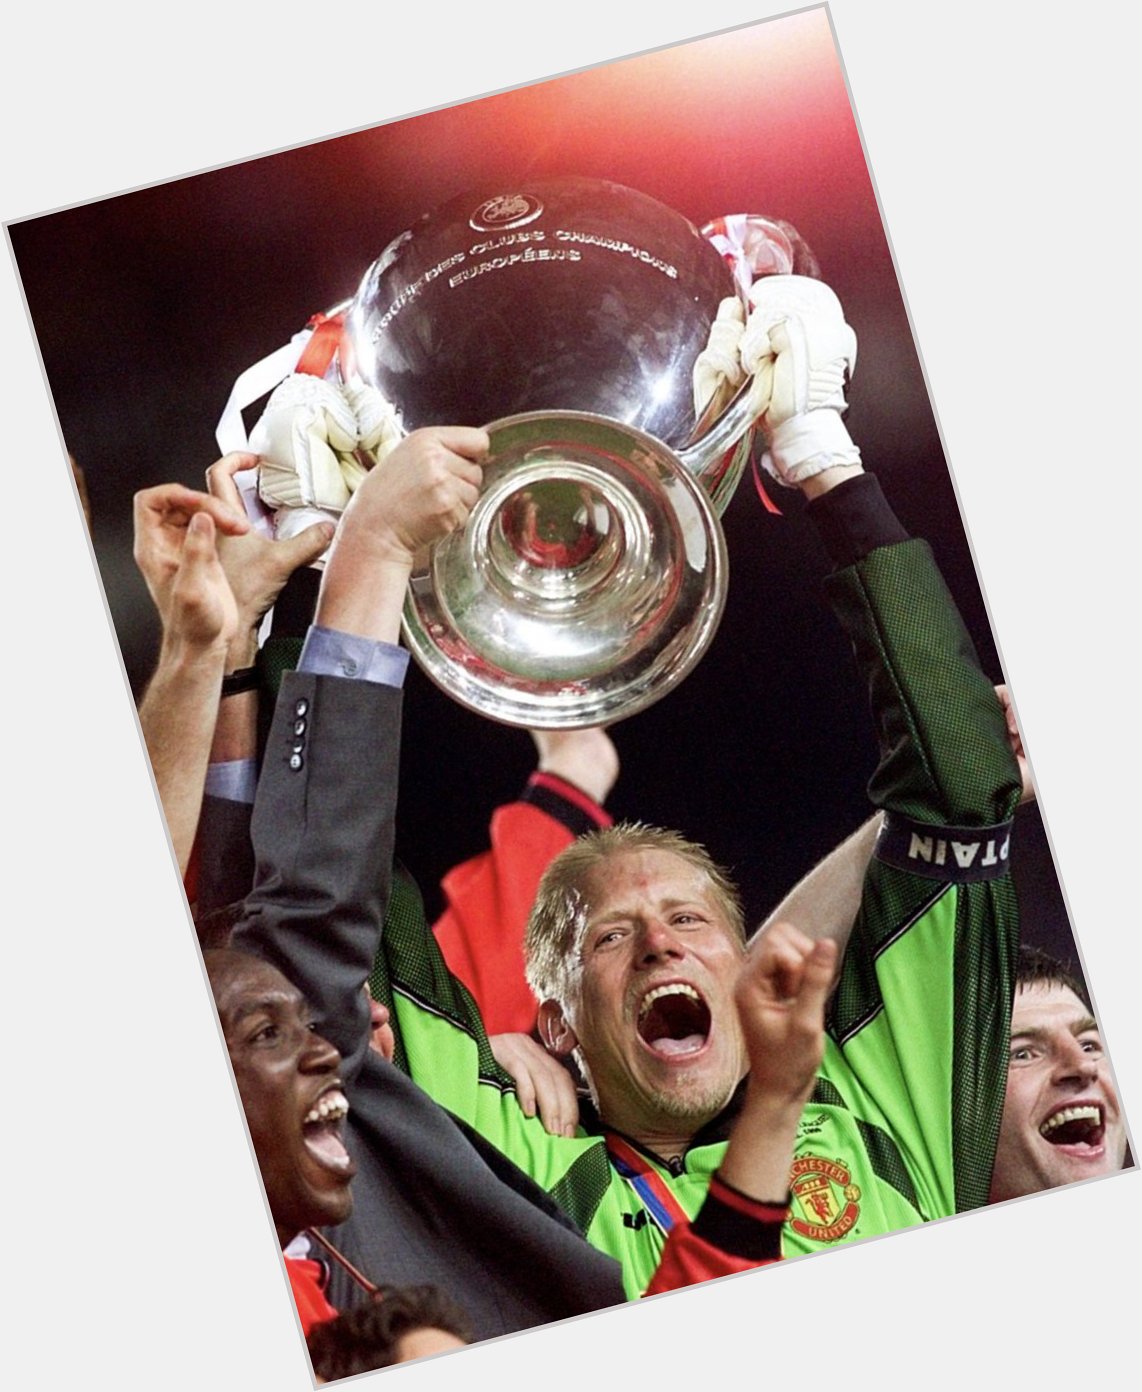 Happy birthday to Peter Schmeichel, who turns 58 today.   